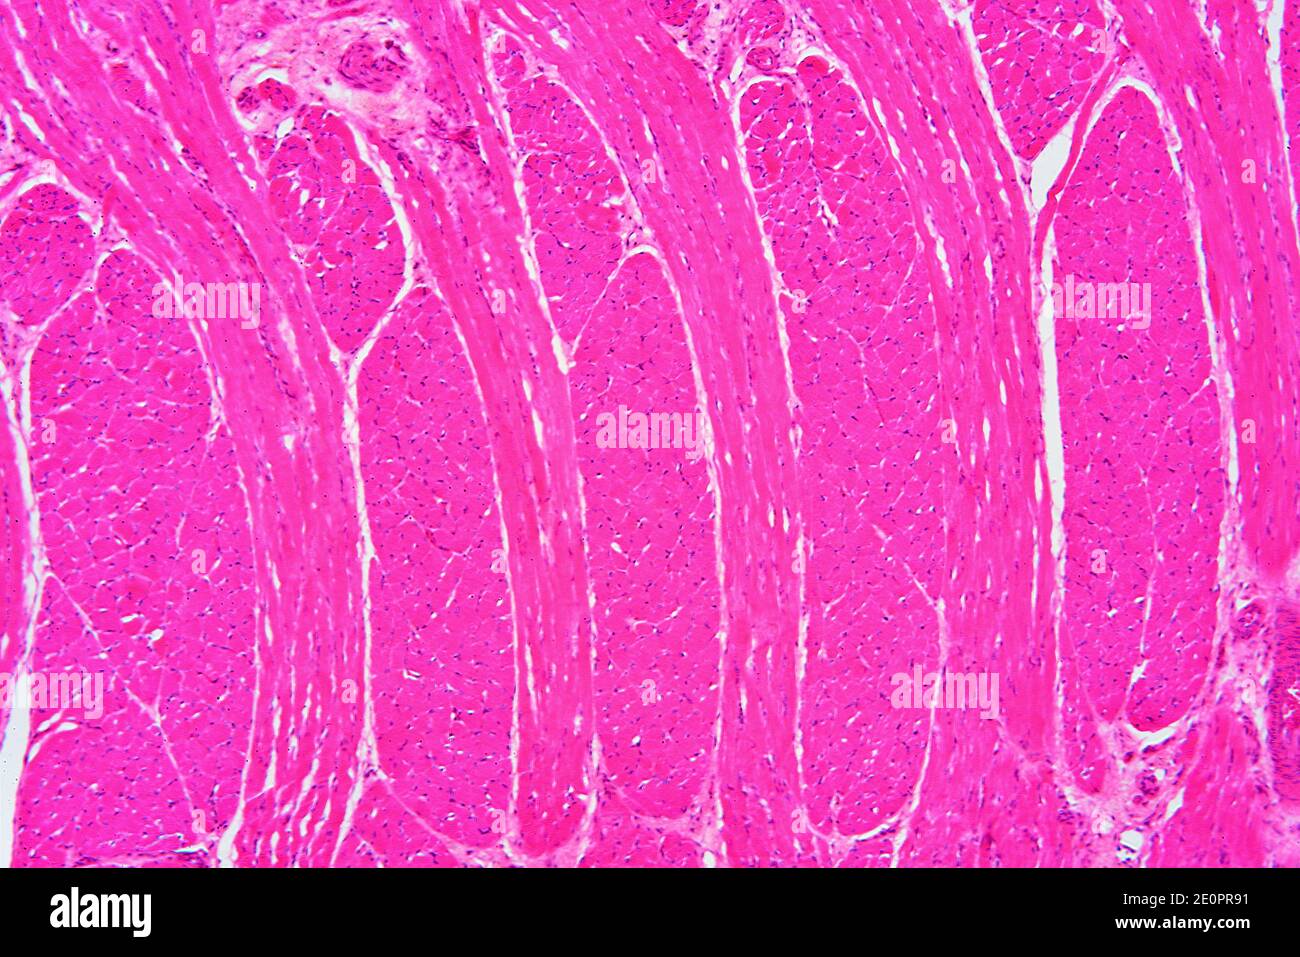 Tongue section with circular and longitudinal striated muscle fibers. X75 at 10 cm wide. Stock Photo